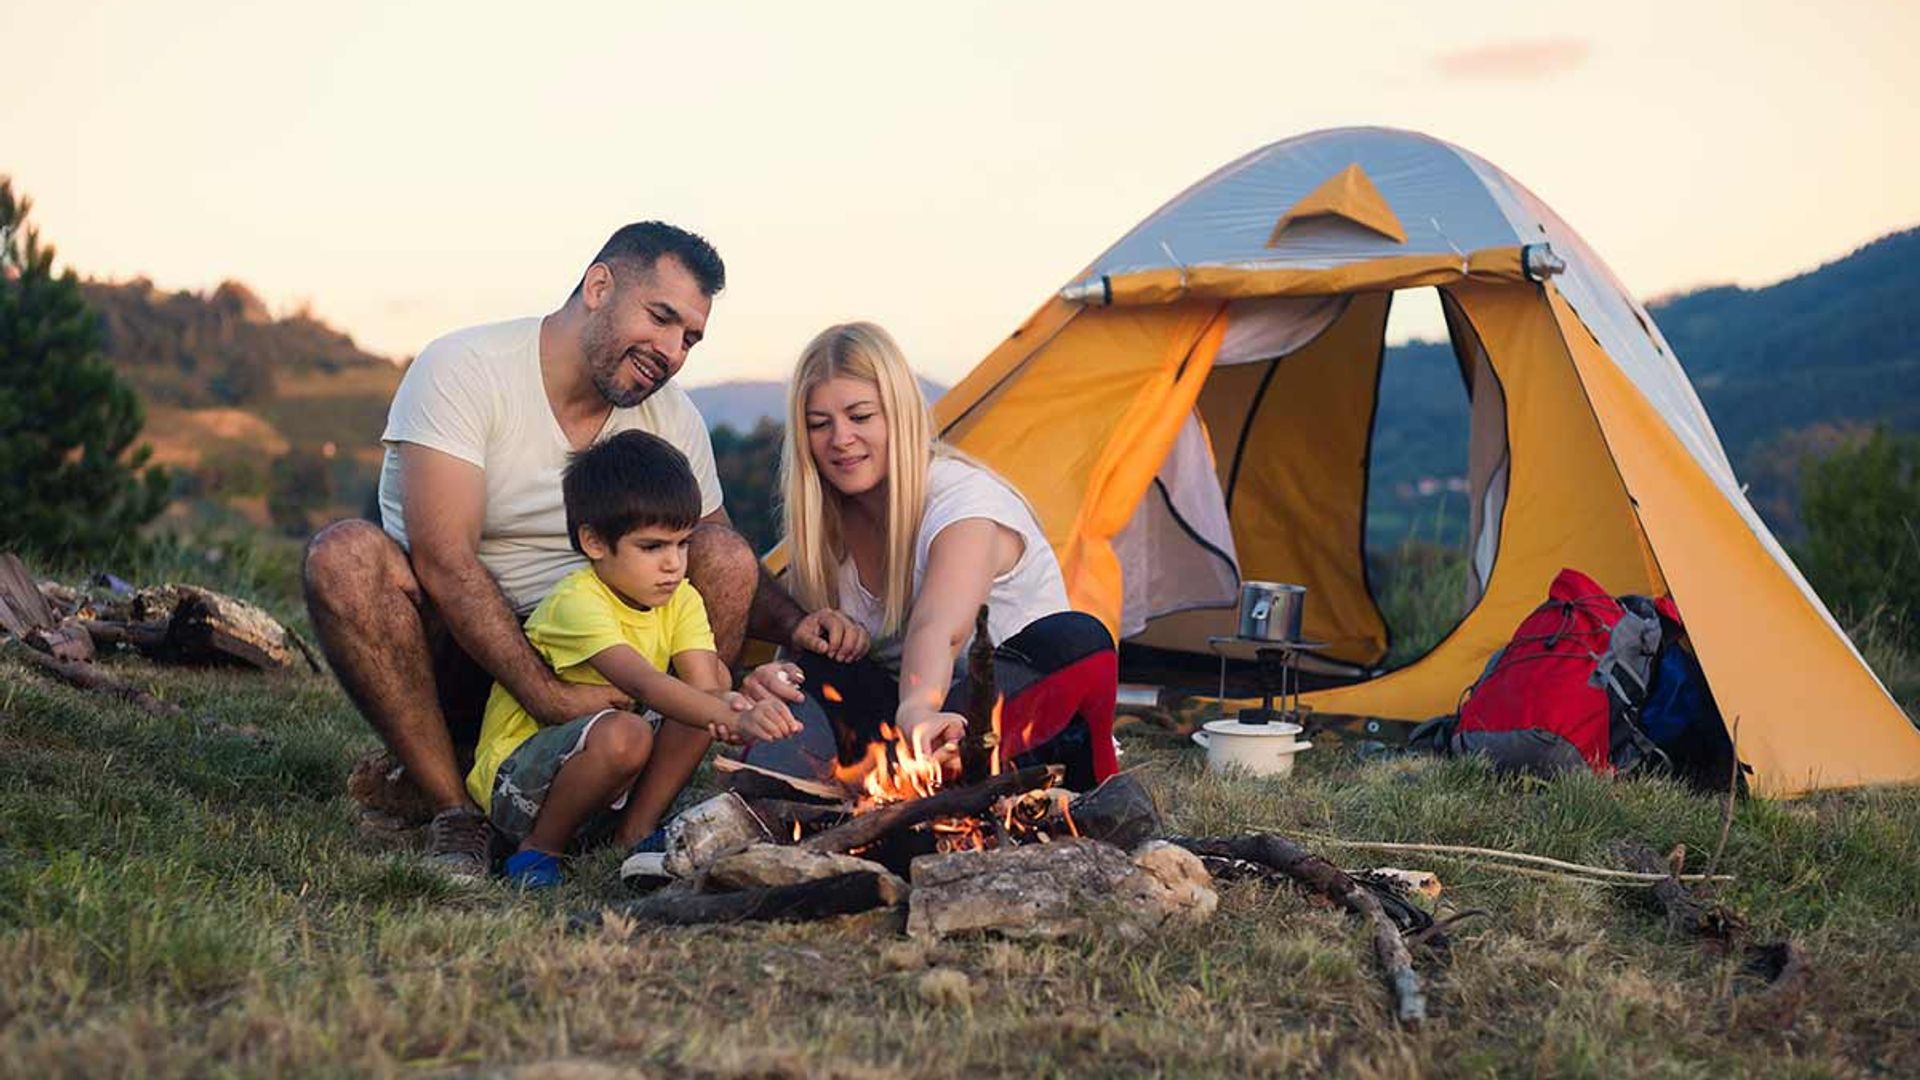 Camping Checklist: The Ultimate Camping Essentials Checklist